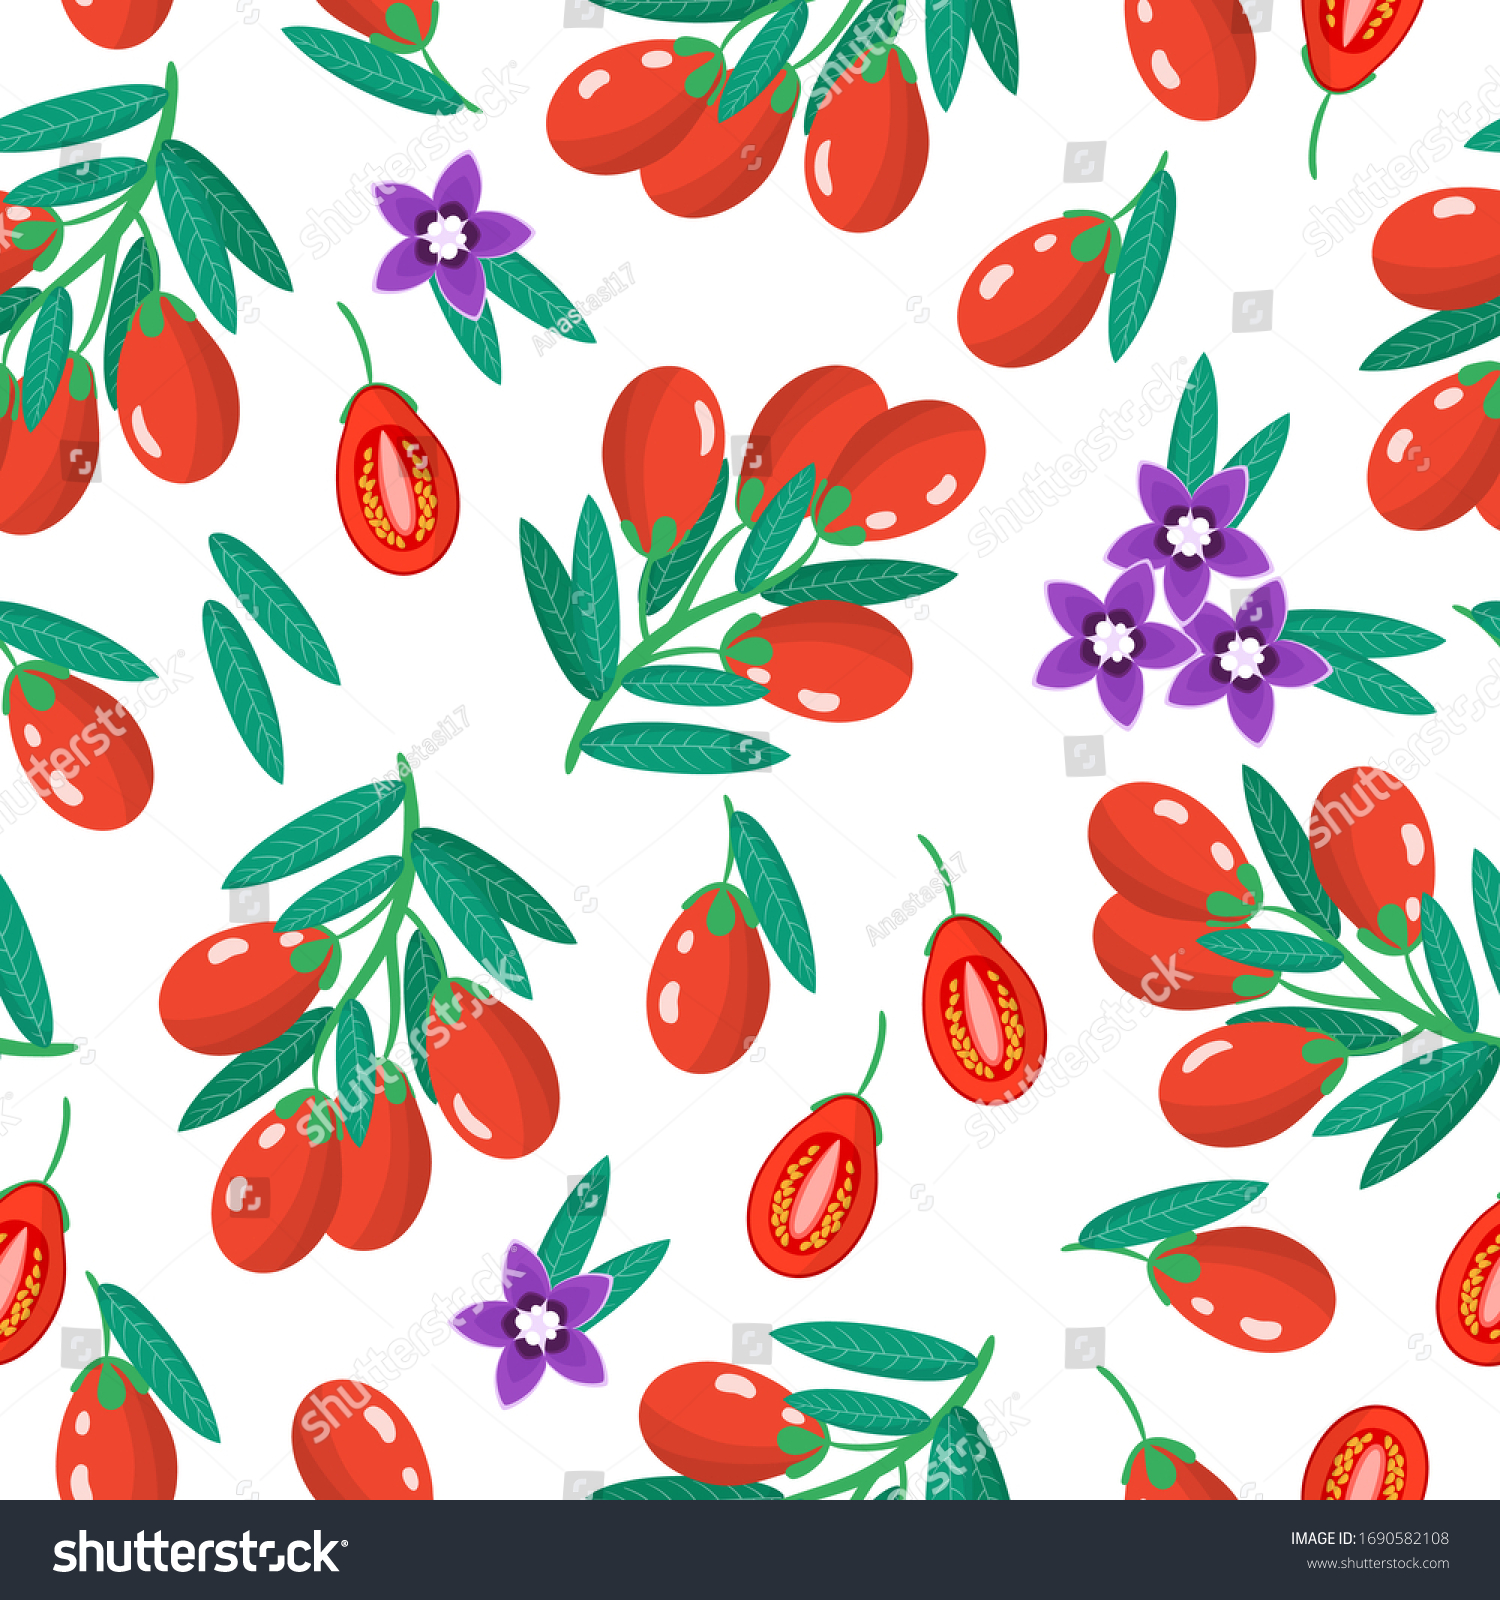 Vector cartoon seamless pattern with Lycium barbarum or Goji exotic fruits, flowers and leafs on white background for web, print, cloth texture or wallpaper #1690582108